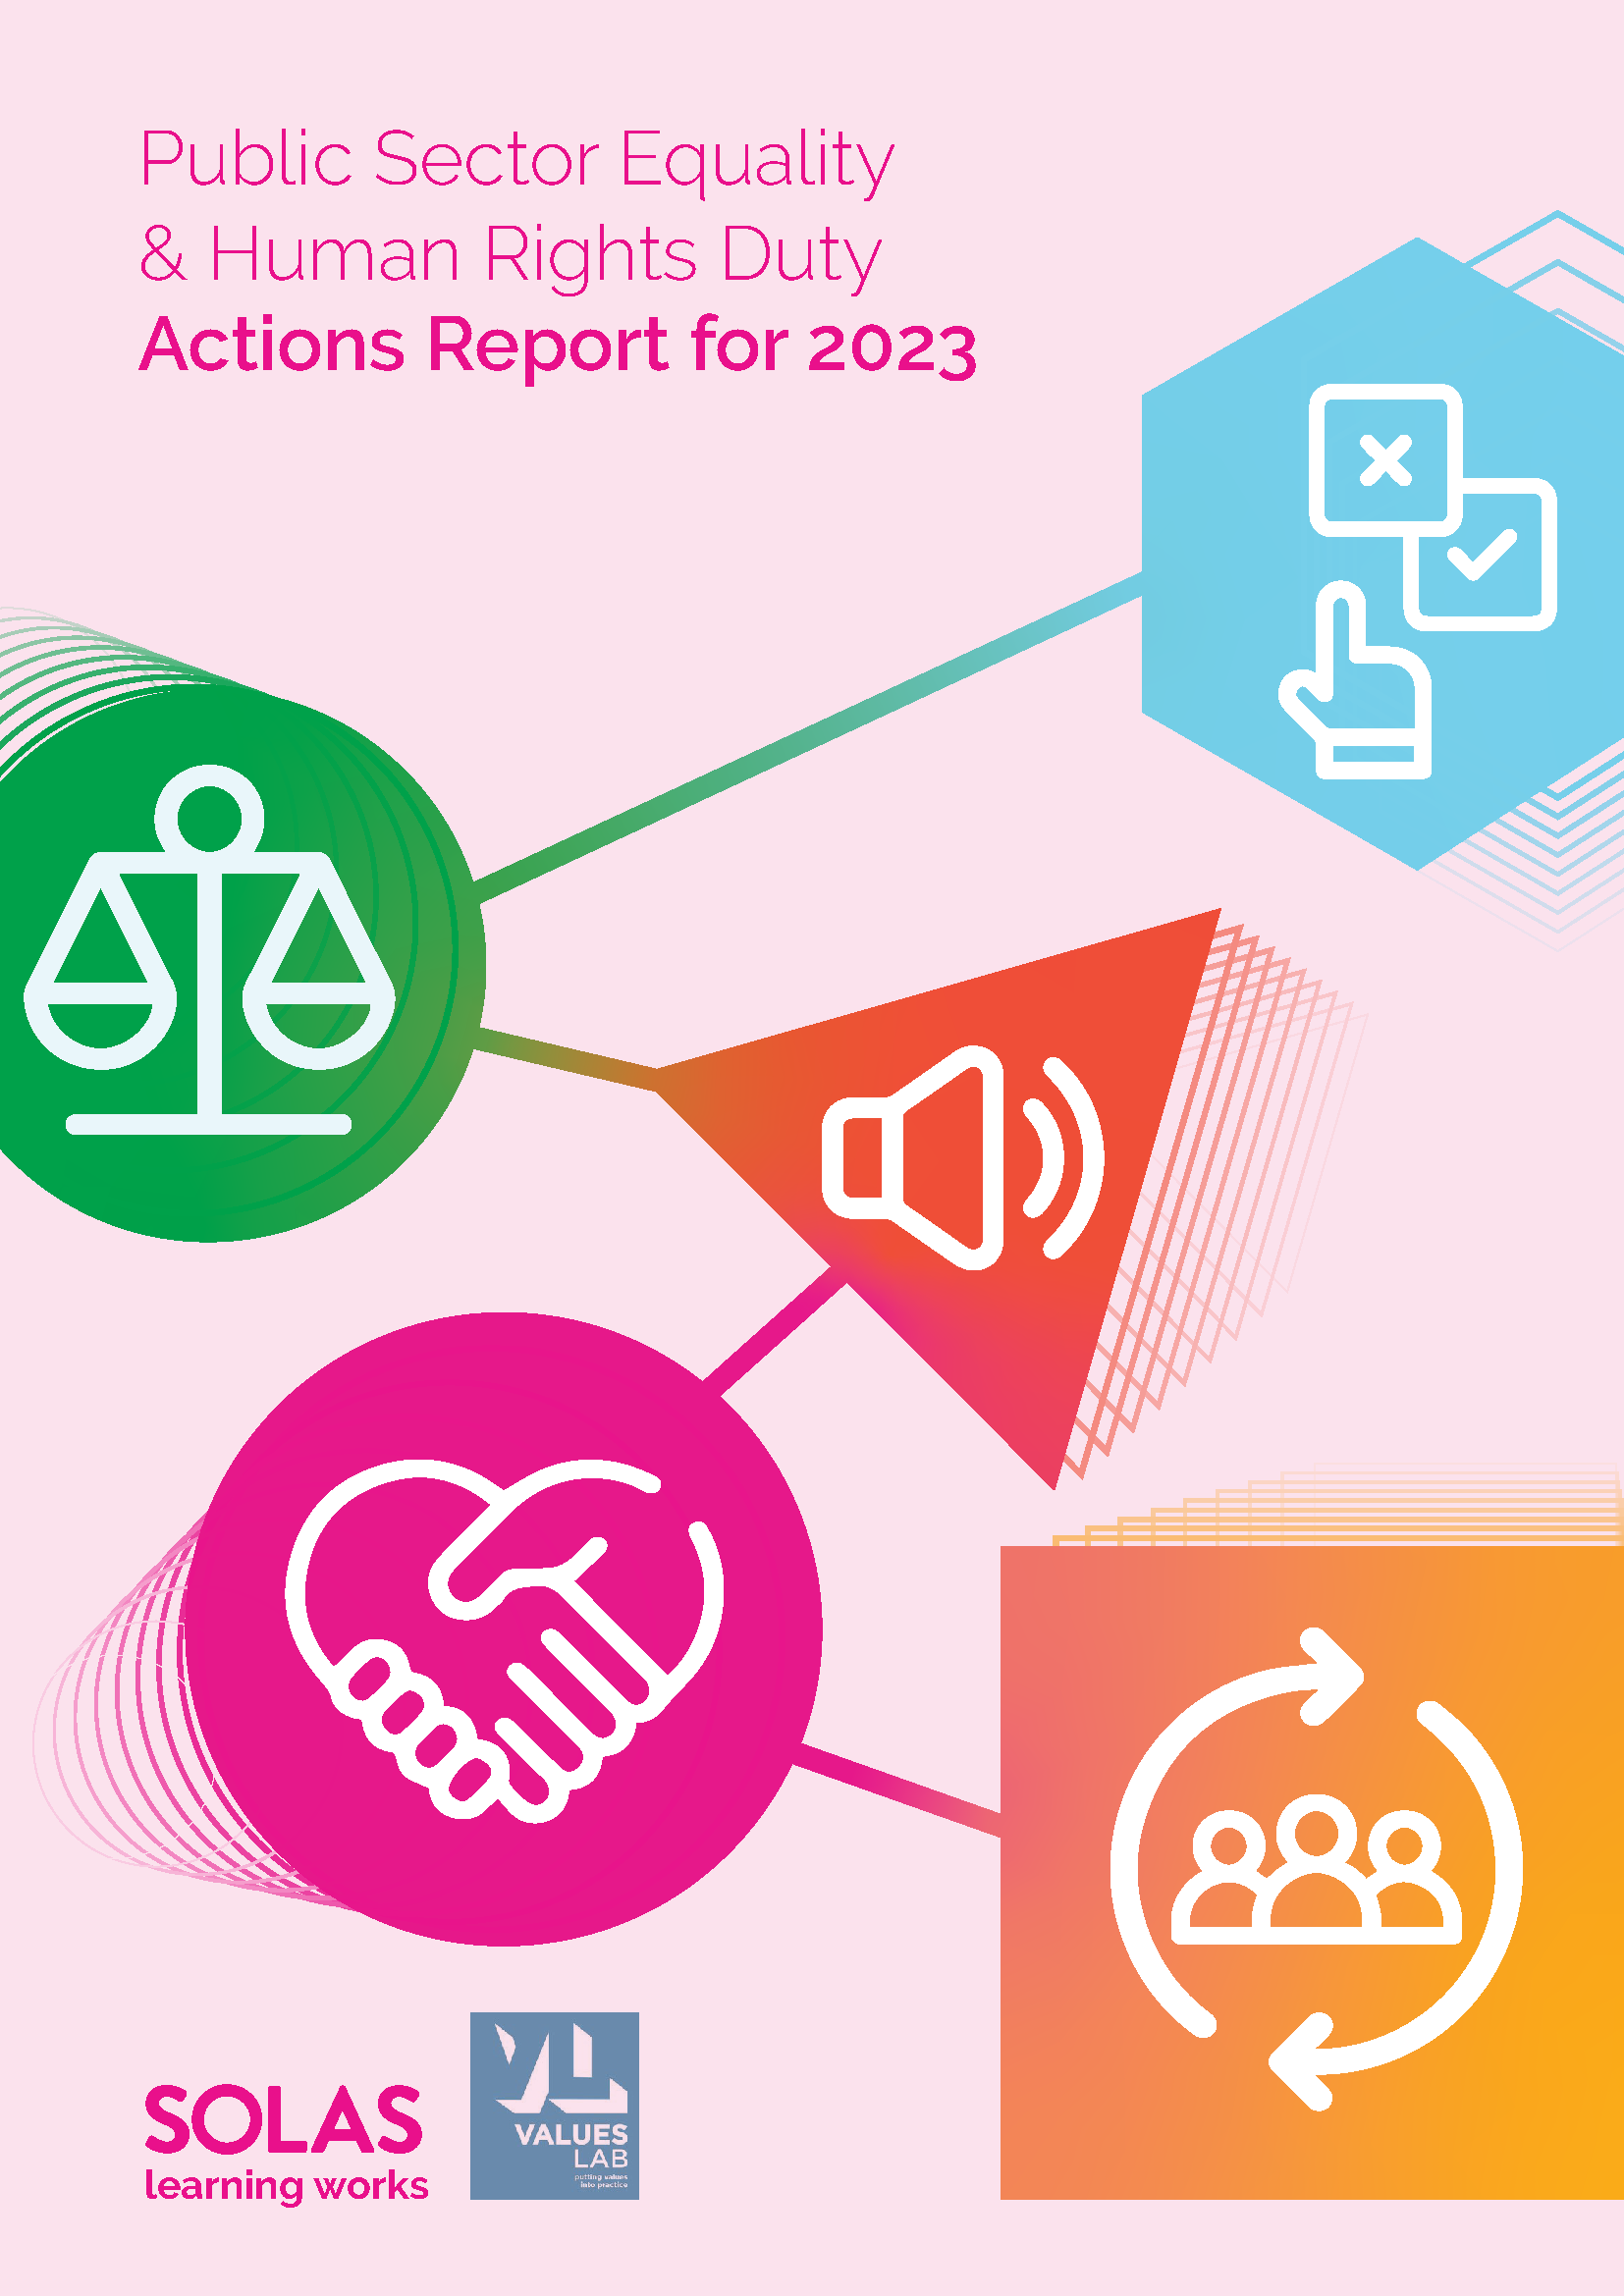 Public Sector Equality & Human Rights Duty Actions Plan for 2023